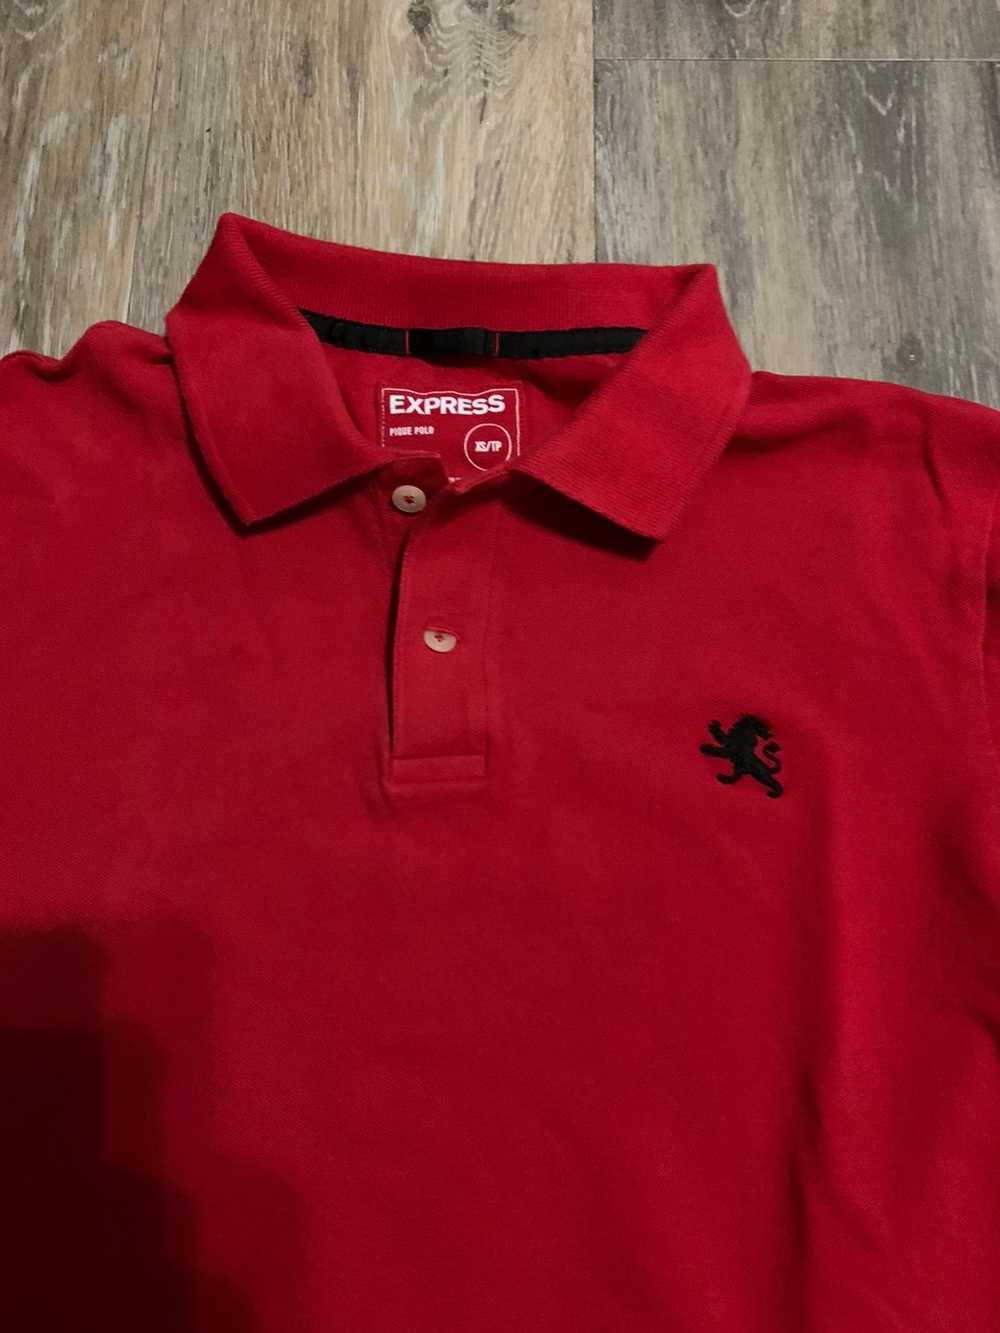 Express Men’s Red Polo Shirt - image 2